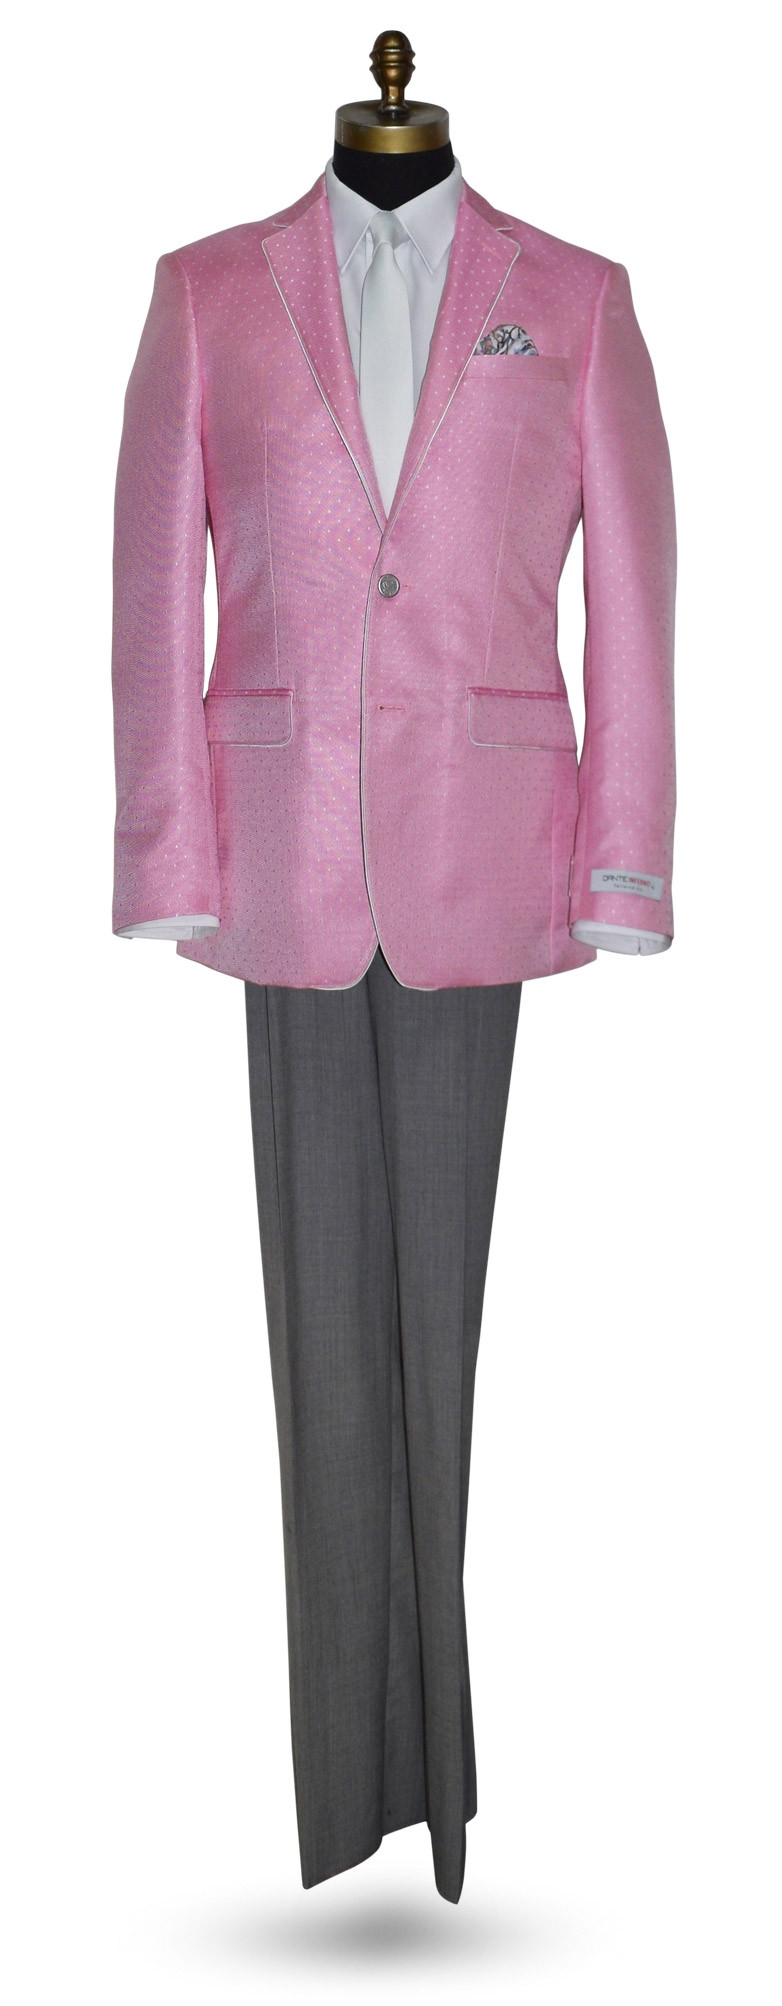 white dress tie with Dante Inferno pink Jacket and men's gray dress pants at TuxBling.com